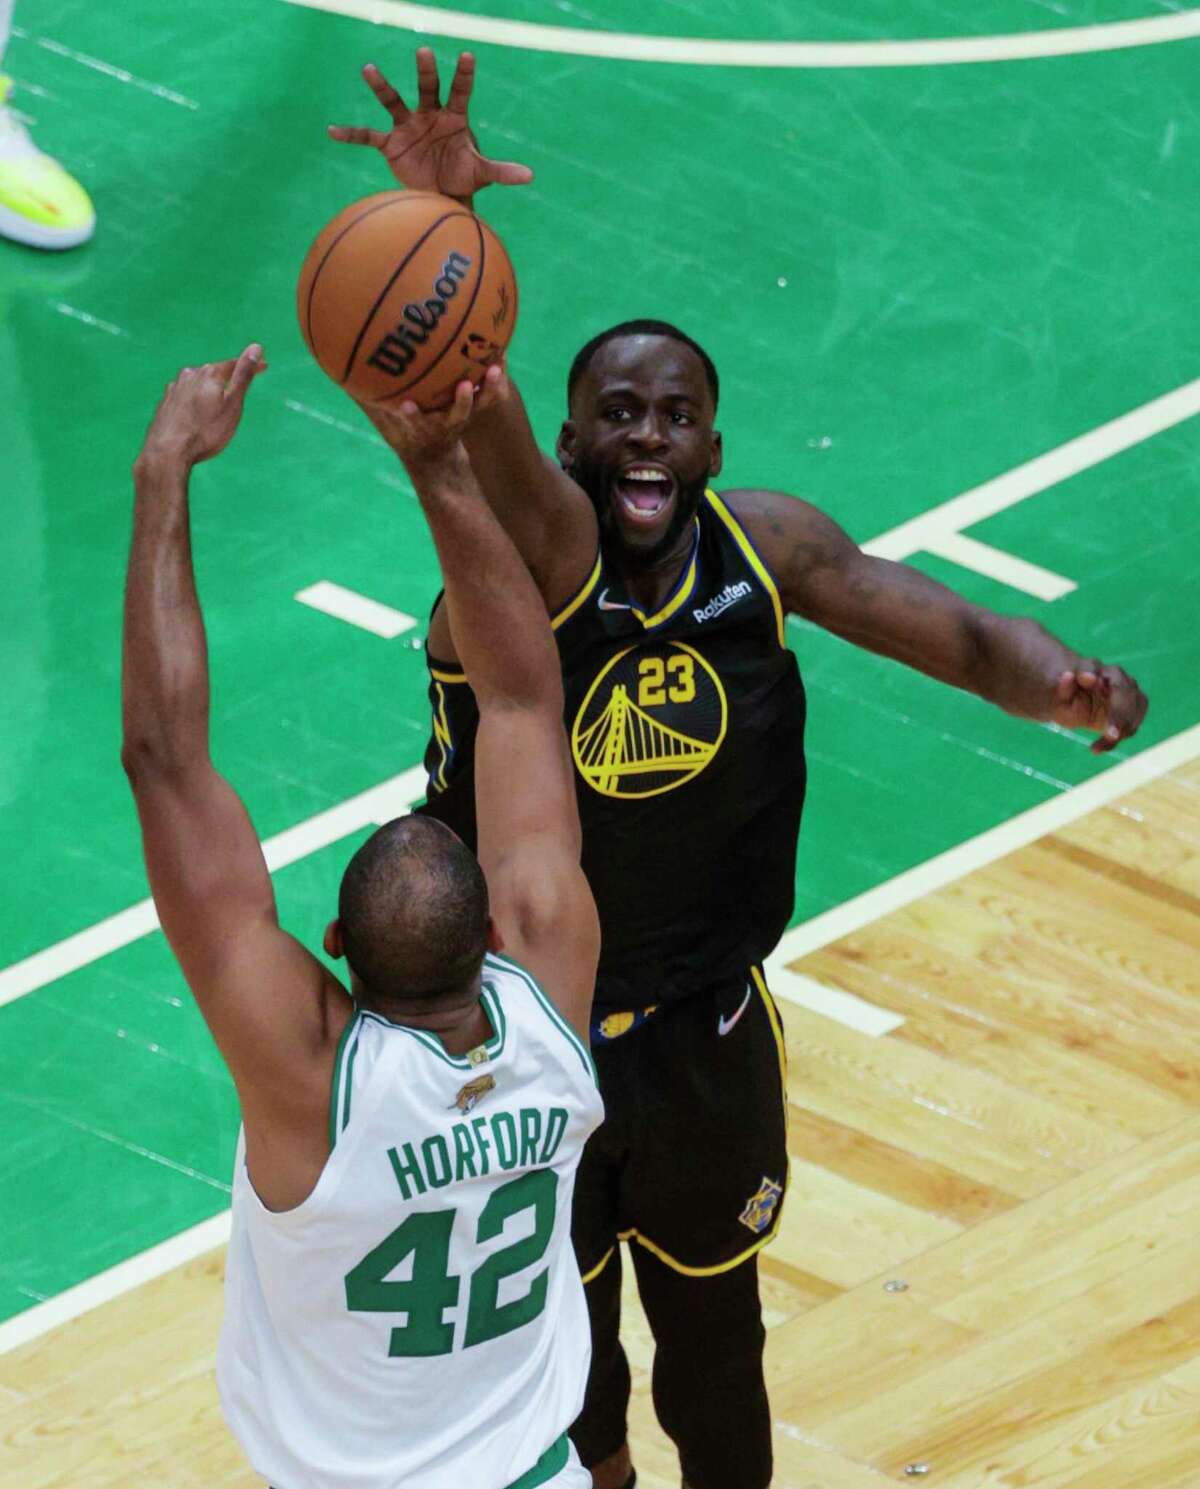 Golden State Warriors' Draymond Green, 23, defends against Boston Celtics' Al Horford, 42, during the second quarter of the NBA Finals at TD Garden in Boston, Mass., on Wednesday, June 8, 2022.